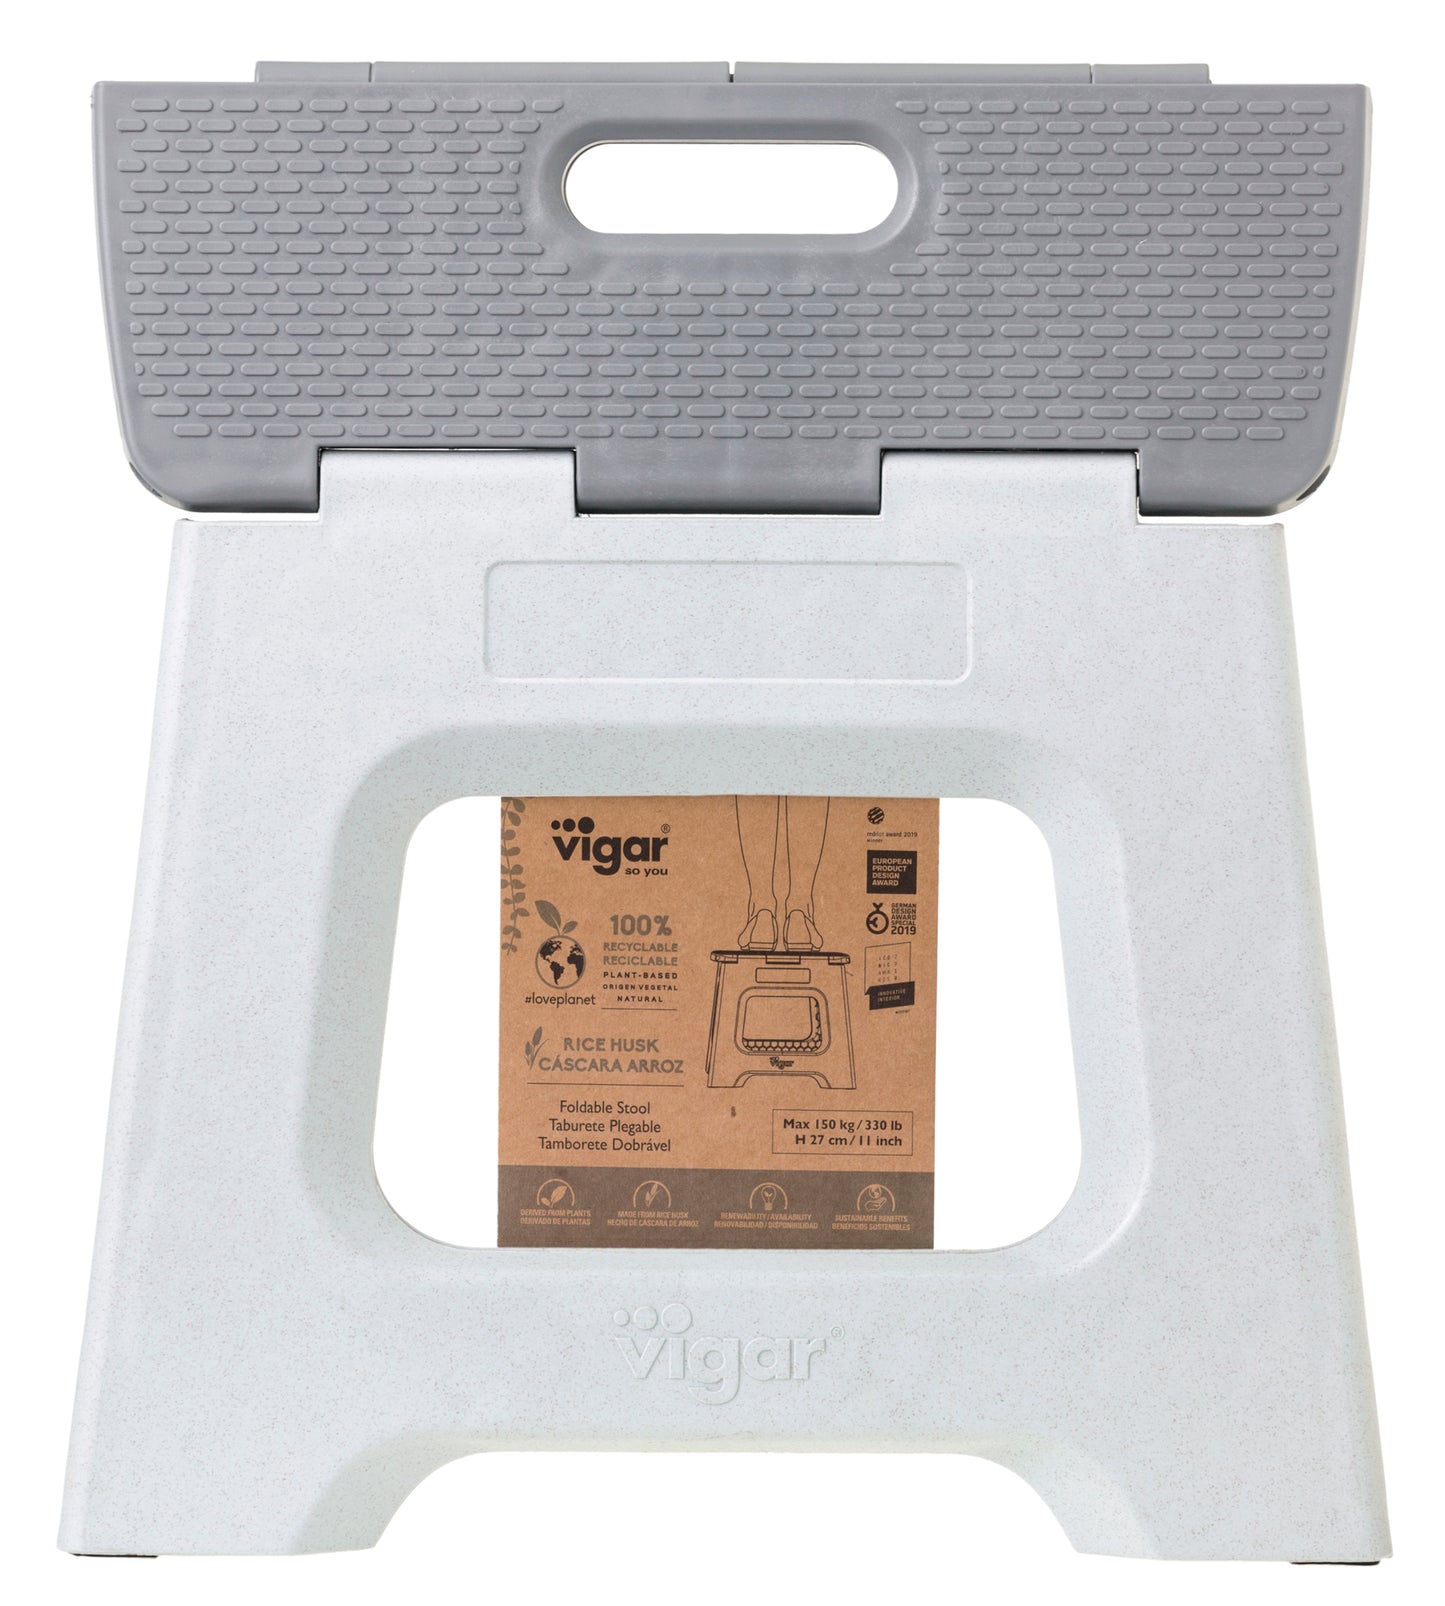 Vigar Compact Foldable Stool 100% Recycled Plastic Zeroline Grey